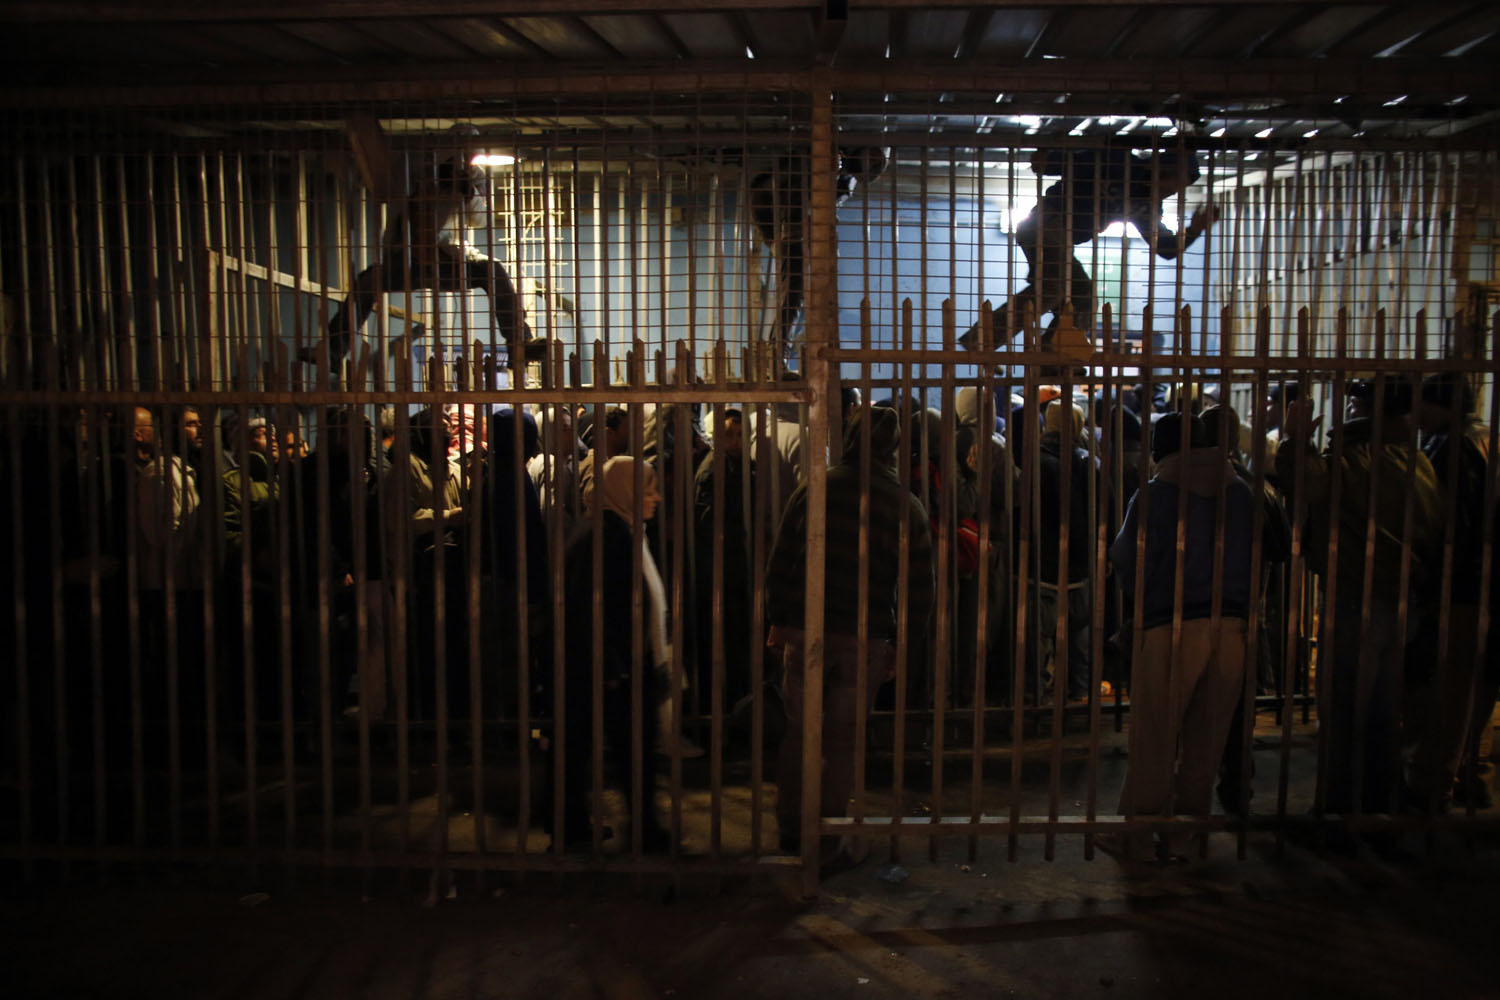 Palestinian labourers wait to cross into Jerusalem at an Israeli checkpoint in Bethlehem